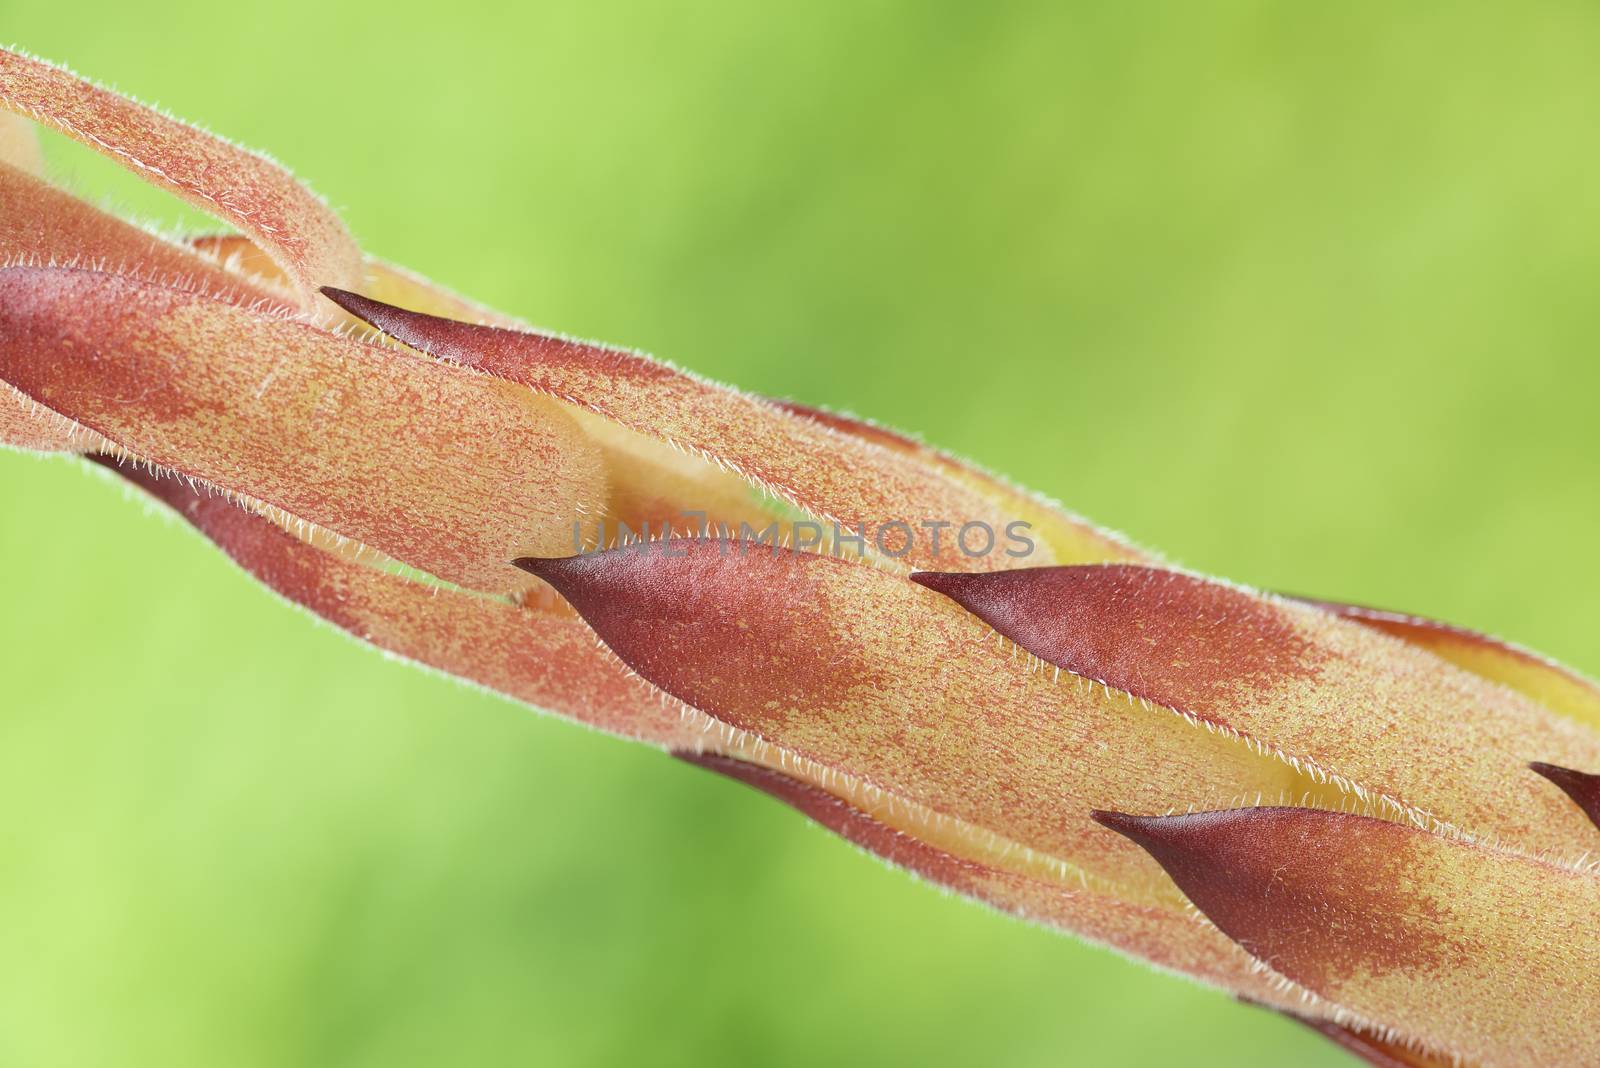 Detail of the stem of the medicinal herb also known as Sempervivum Tectorum
